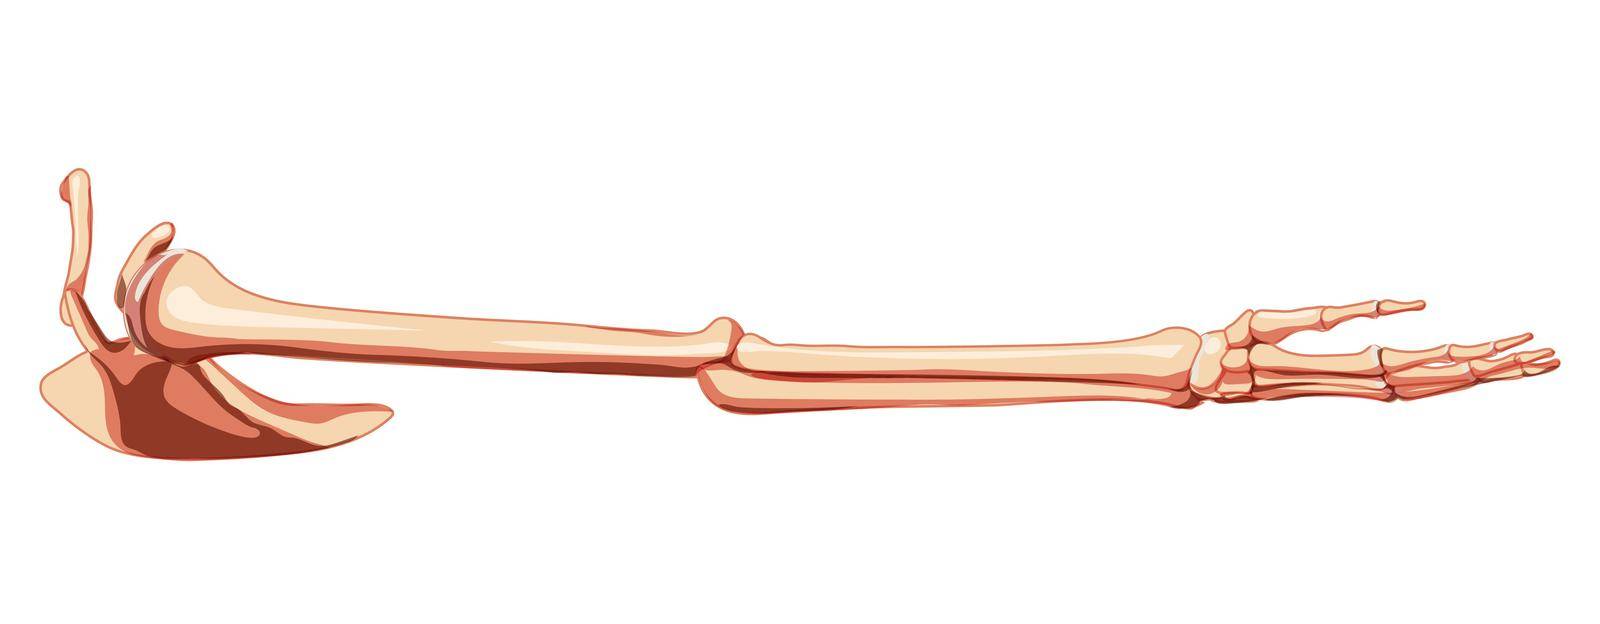 Upper limb Arm with Shoulder girdle Skeleton Human side lateral view. Anatomically correct realistic flat natural by Vectoressa